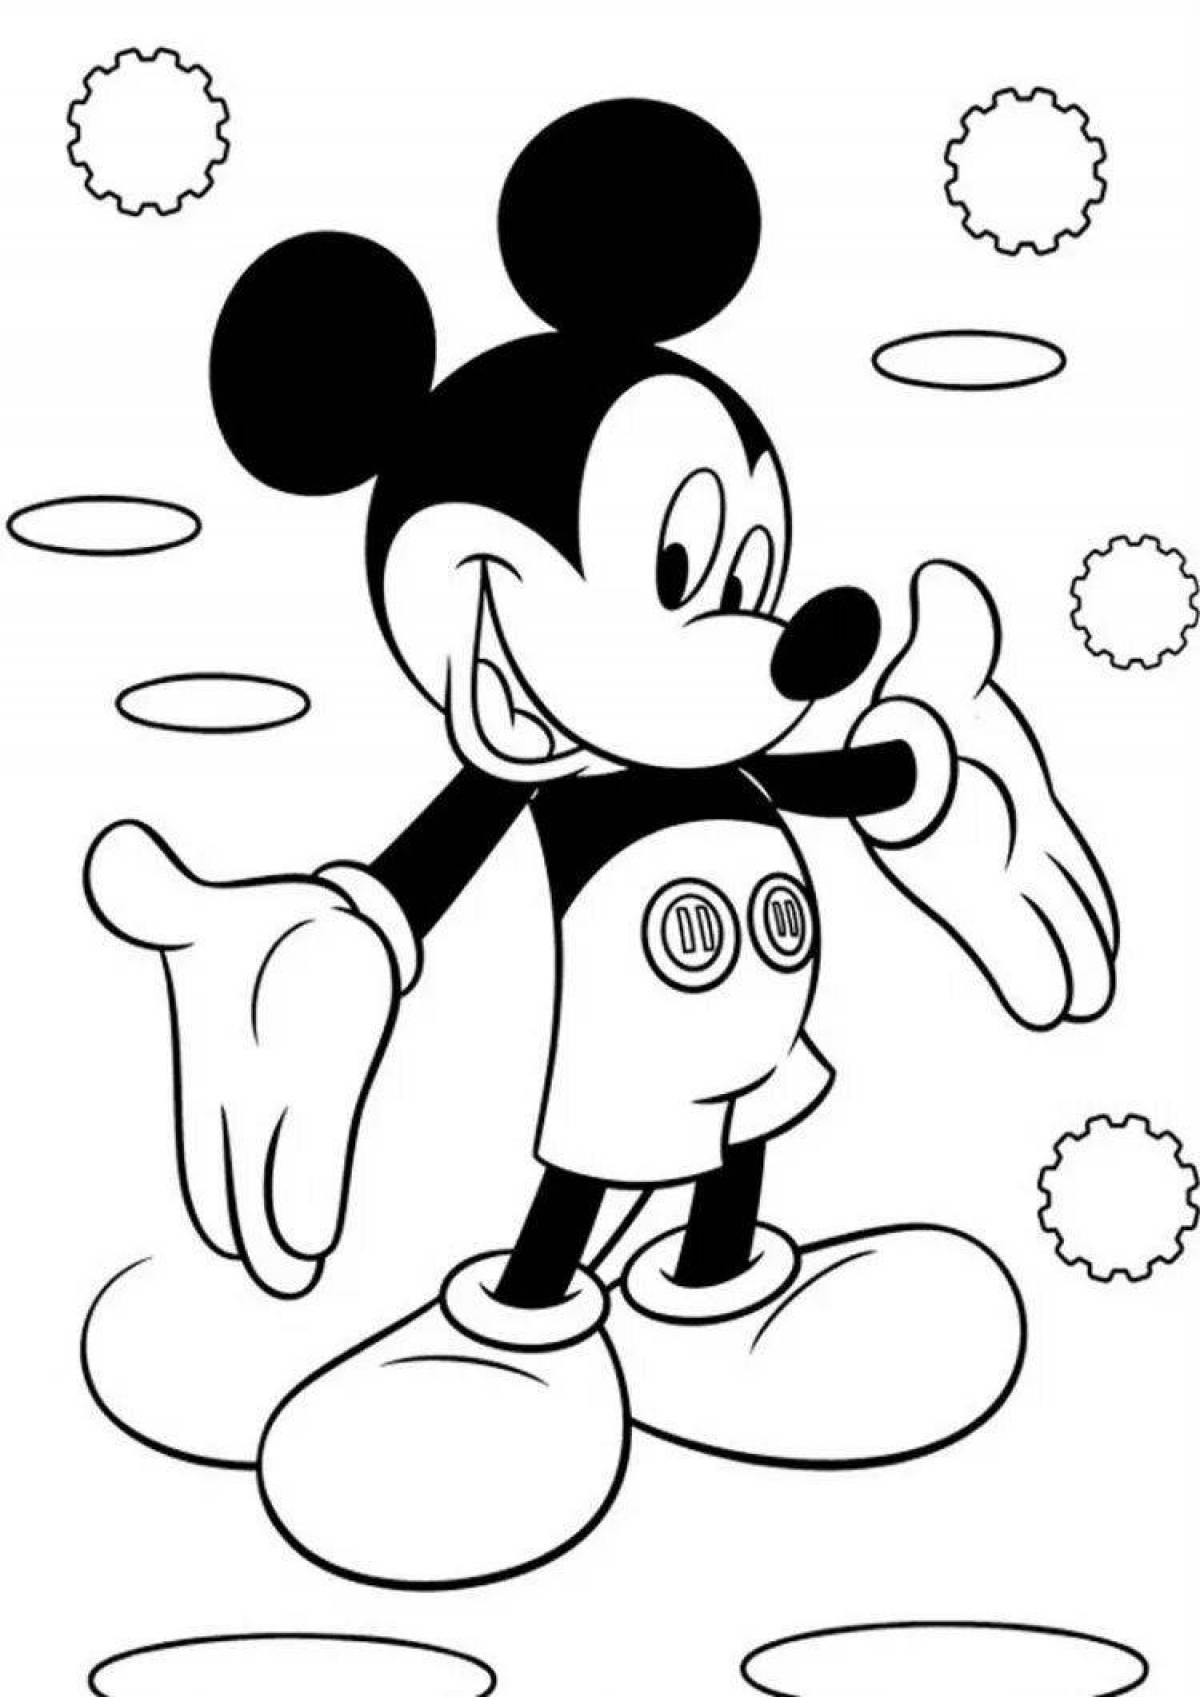 Cute mickey mouse coloring book